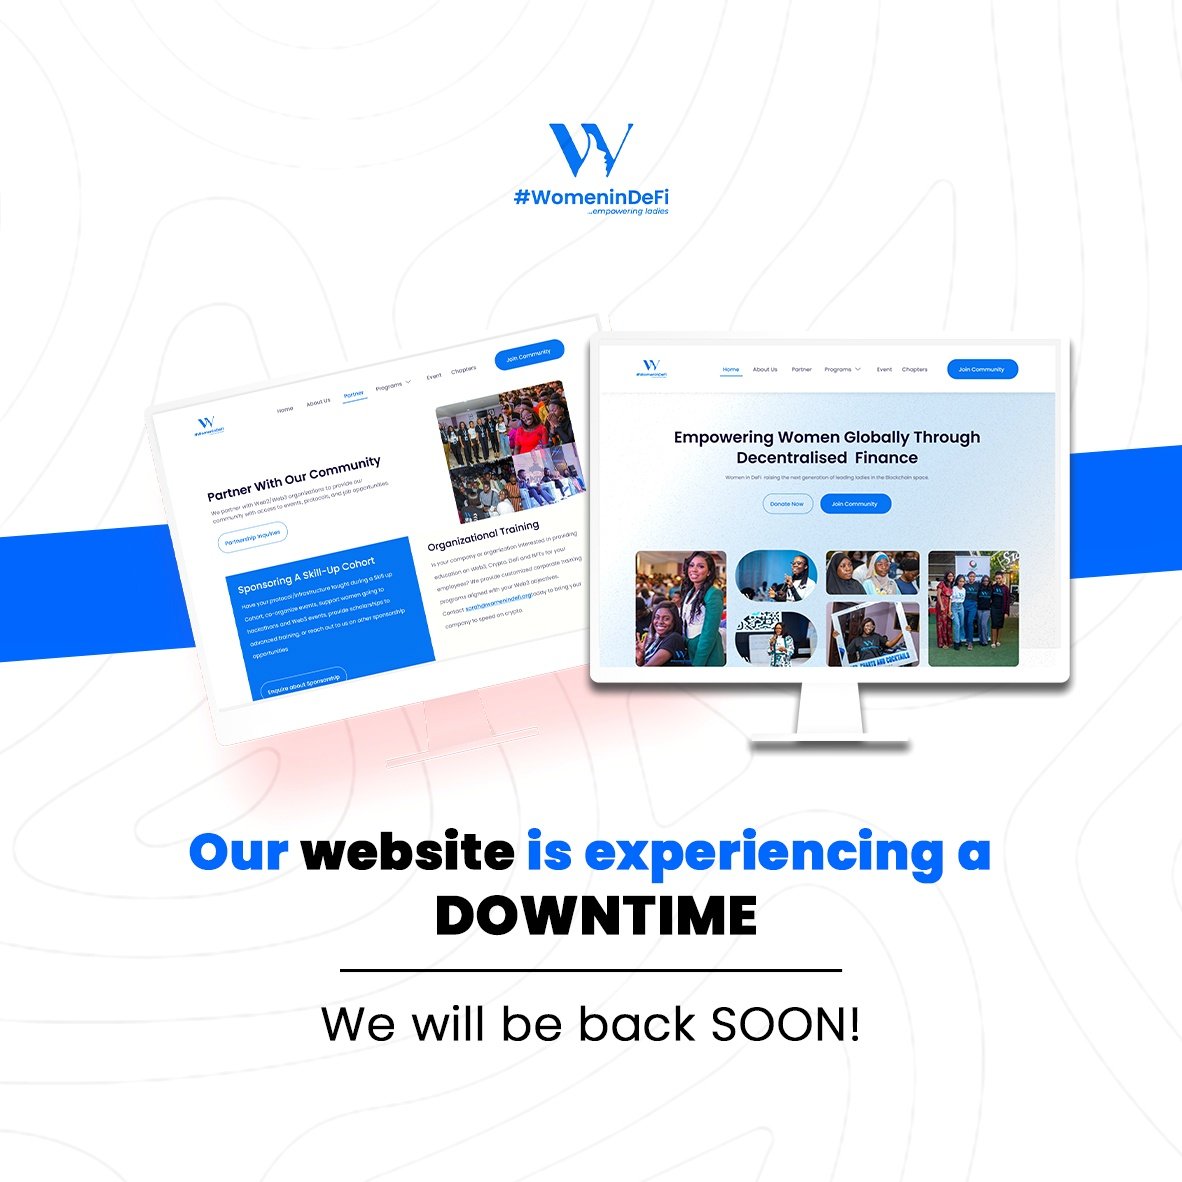 Website down ❌️ but Access not denied✅️ 👇🏽 Apply to join the WOMENINDEFI community! docs.google.com/forms/d/12mBRQ…